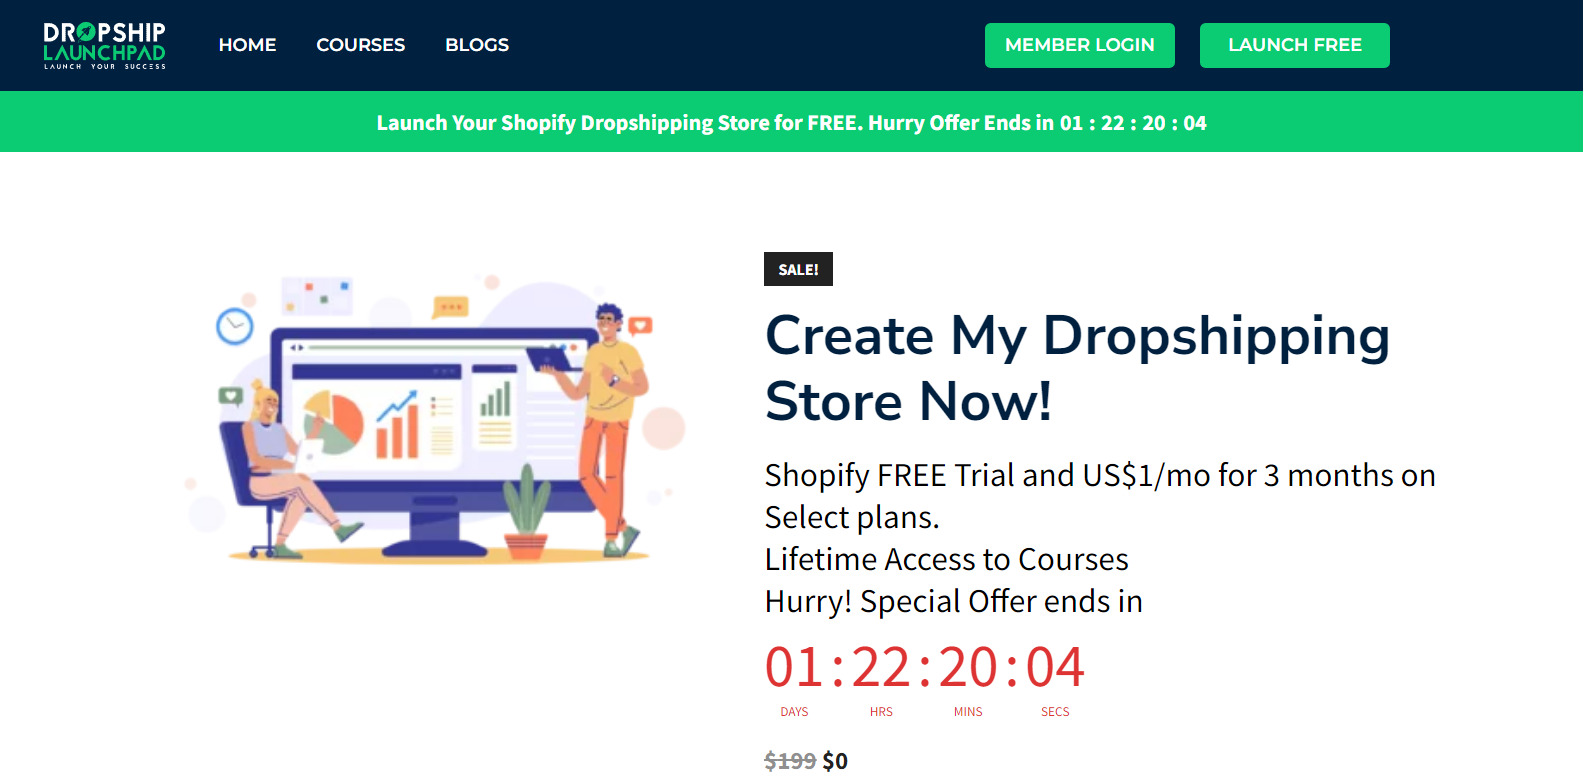 Why buy the Shopify coffee store on DROPSHIP LAUNCHPAD?